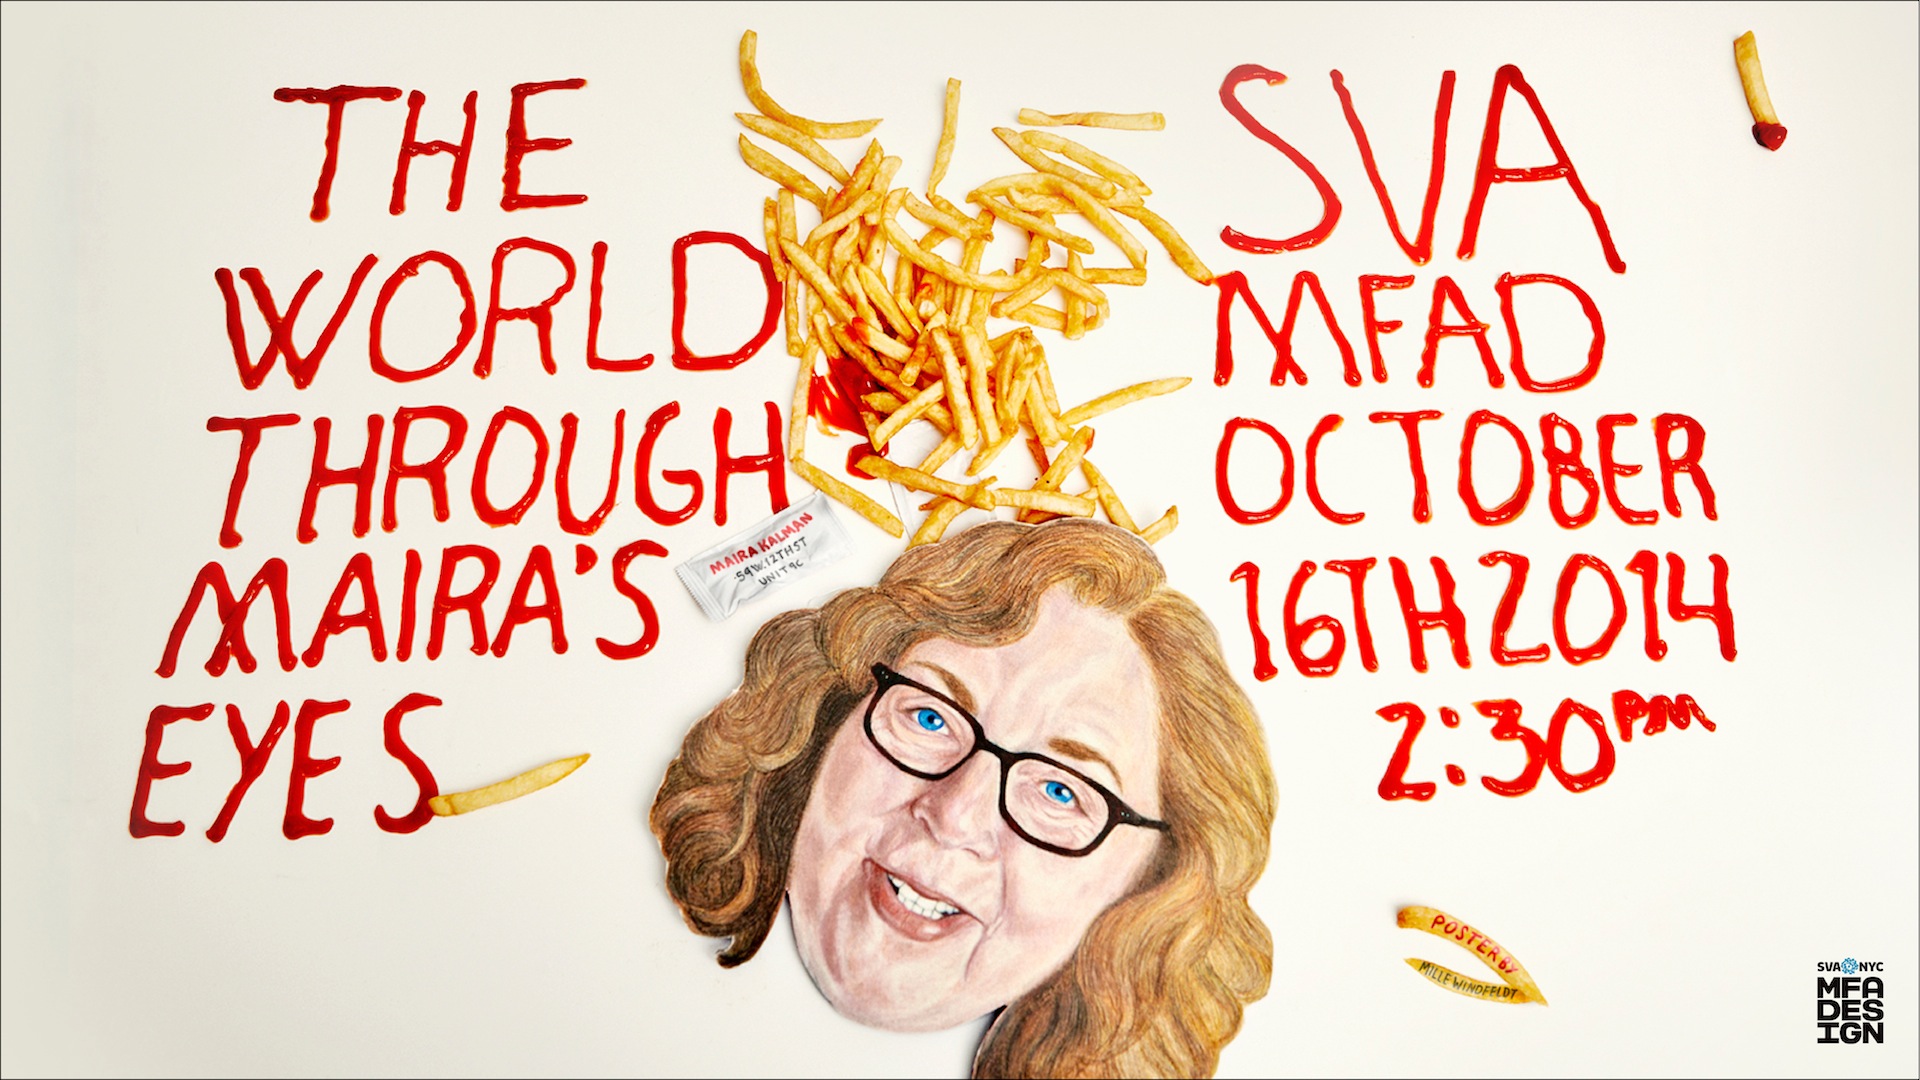 A poster of a table filled with fries, a text written with ketchup: The World Trough Maria's Eyes. SVA MFAD and the paining of a woman's face wearing glasses..